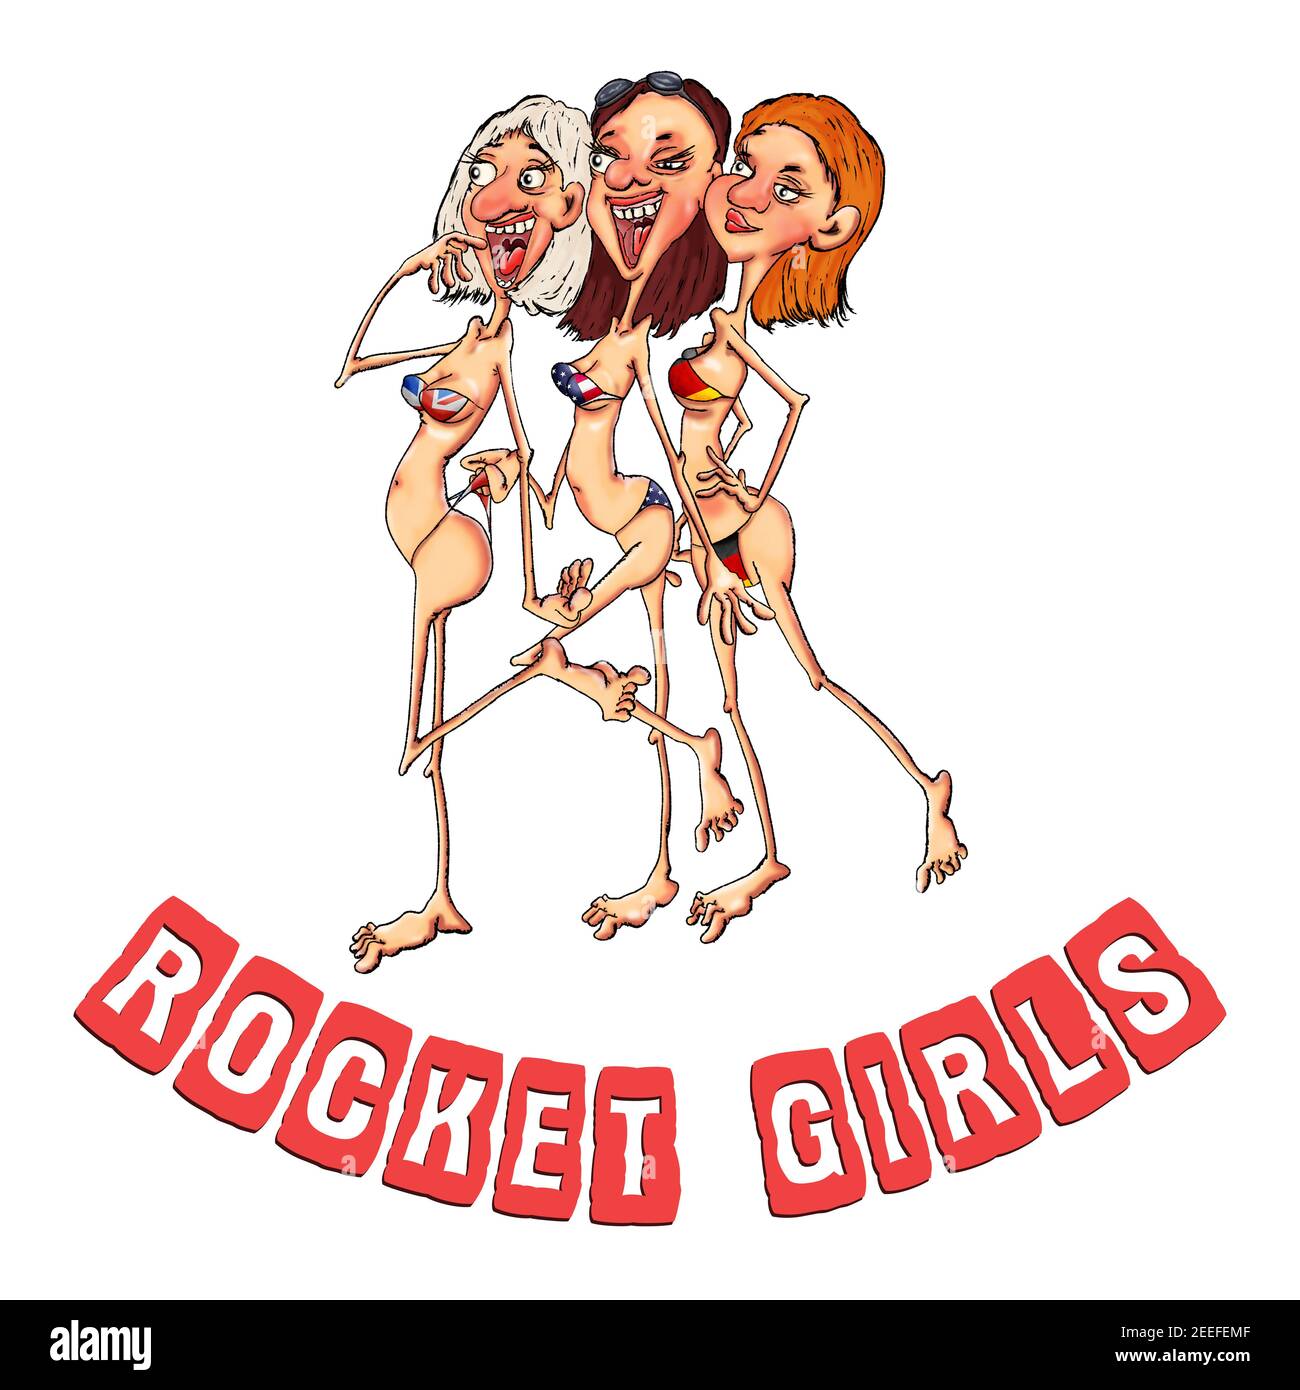 Rocket girls are glamorous fashion models. Illustration for posters and stickers.. Stock Photo